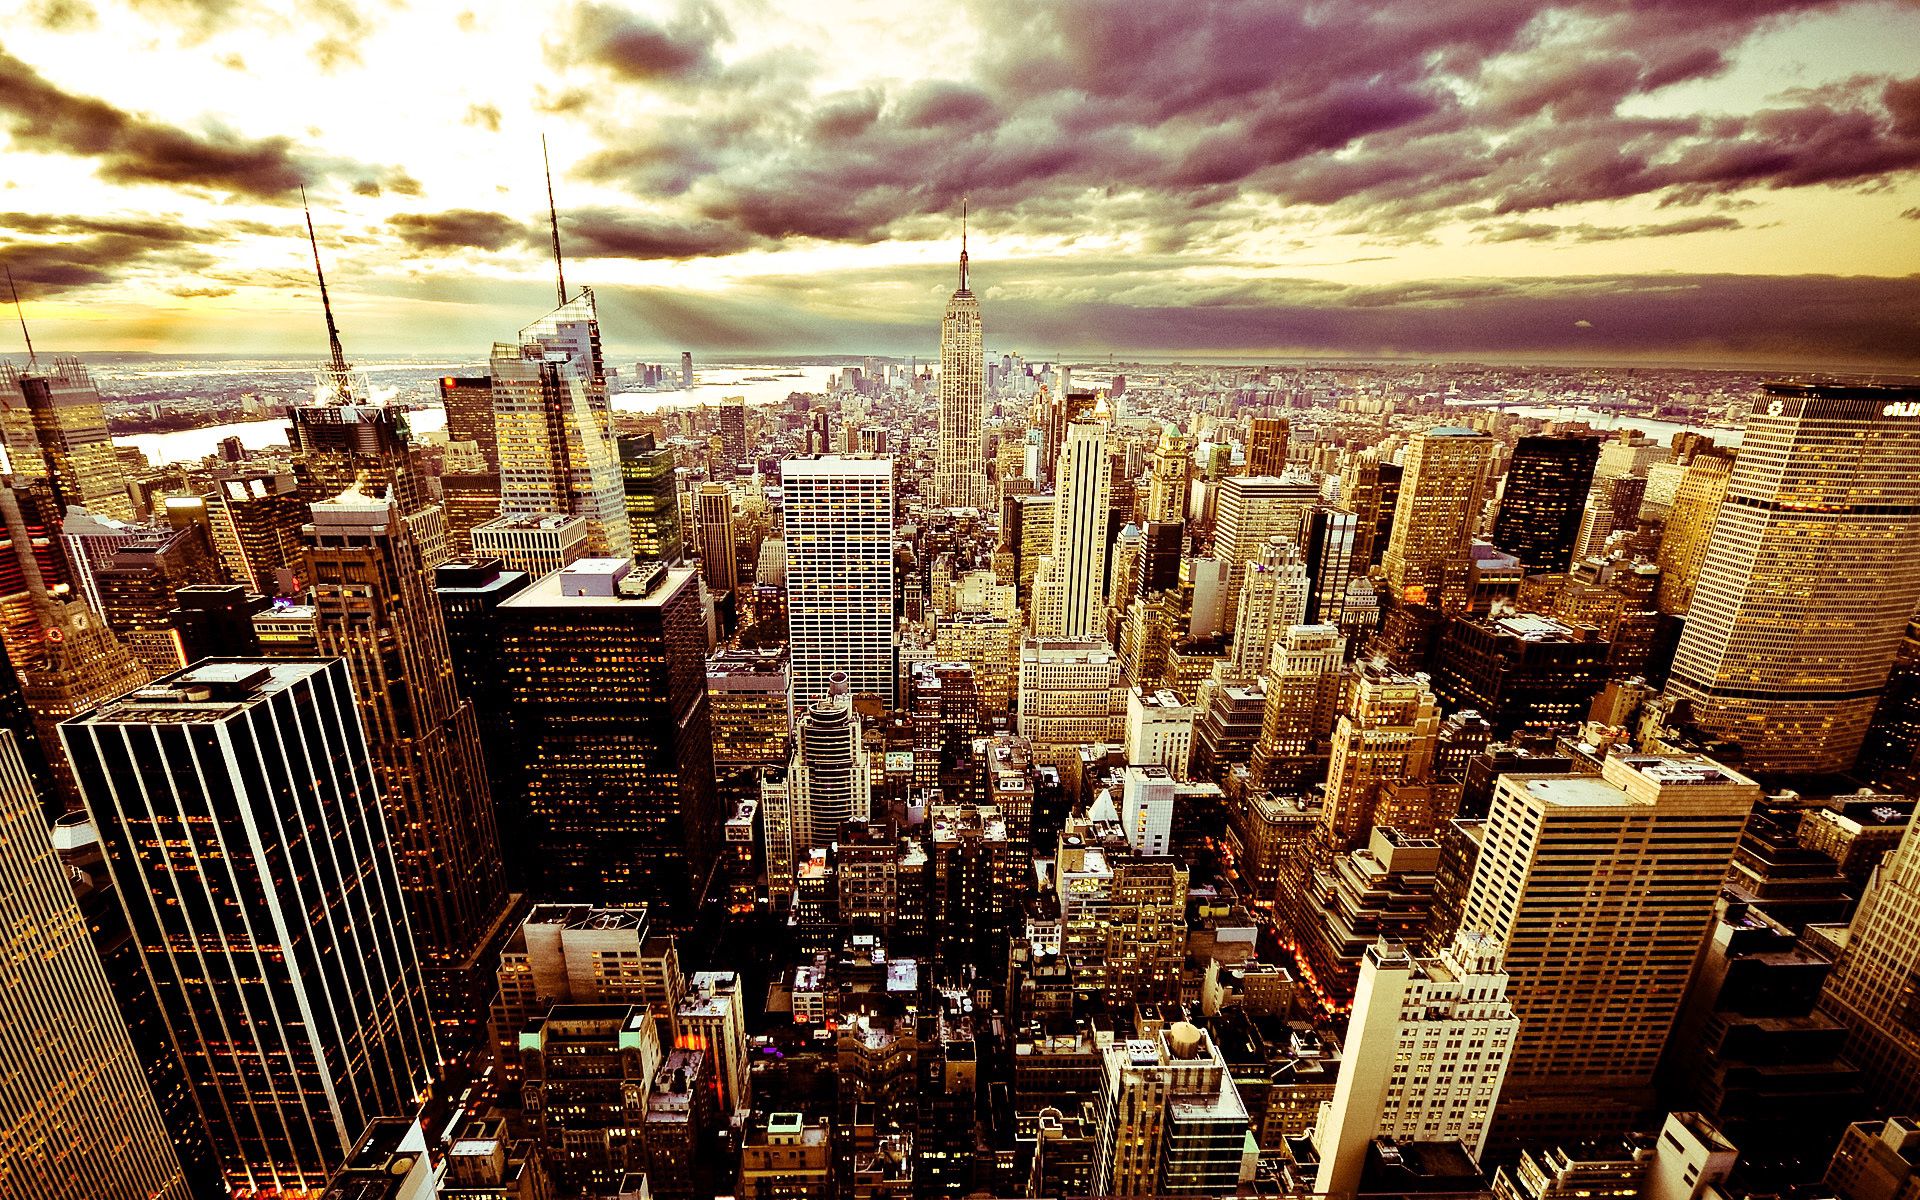 skyscrapers, usa, america, cities, sky, clouds, city, building, evening, united states, new york, handsomely, it's beautiful, ny